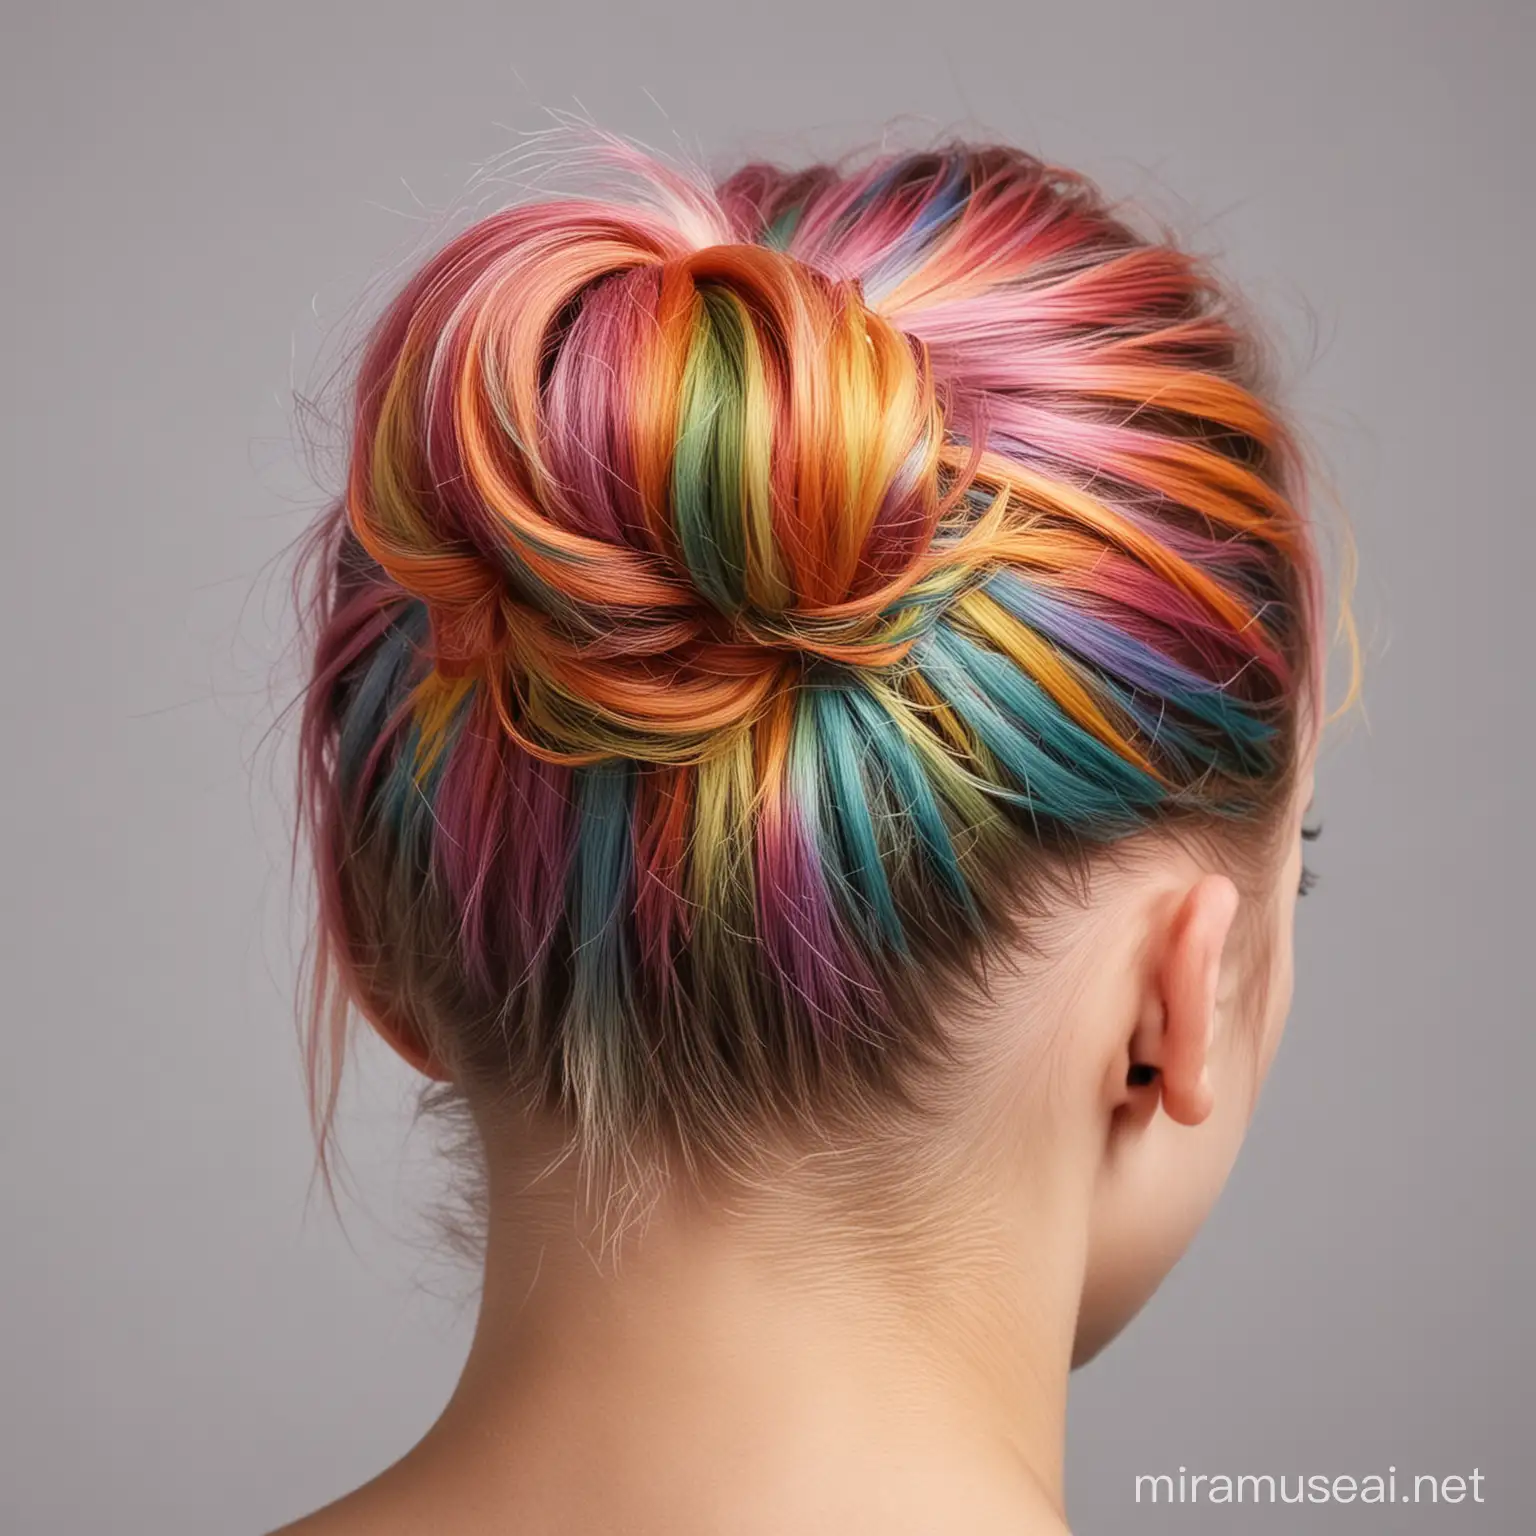 Young girl's rainbow hair tied up neatly. Can be a close shot so you just see the hair